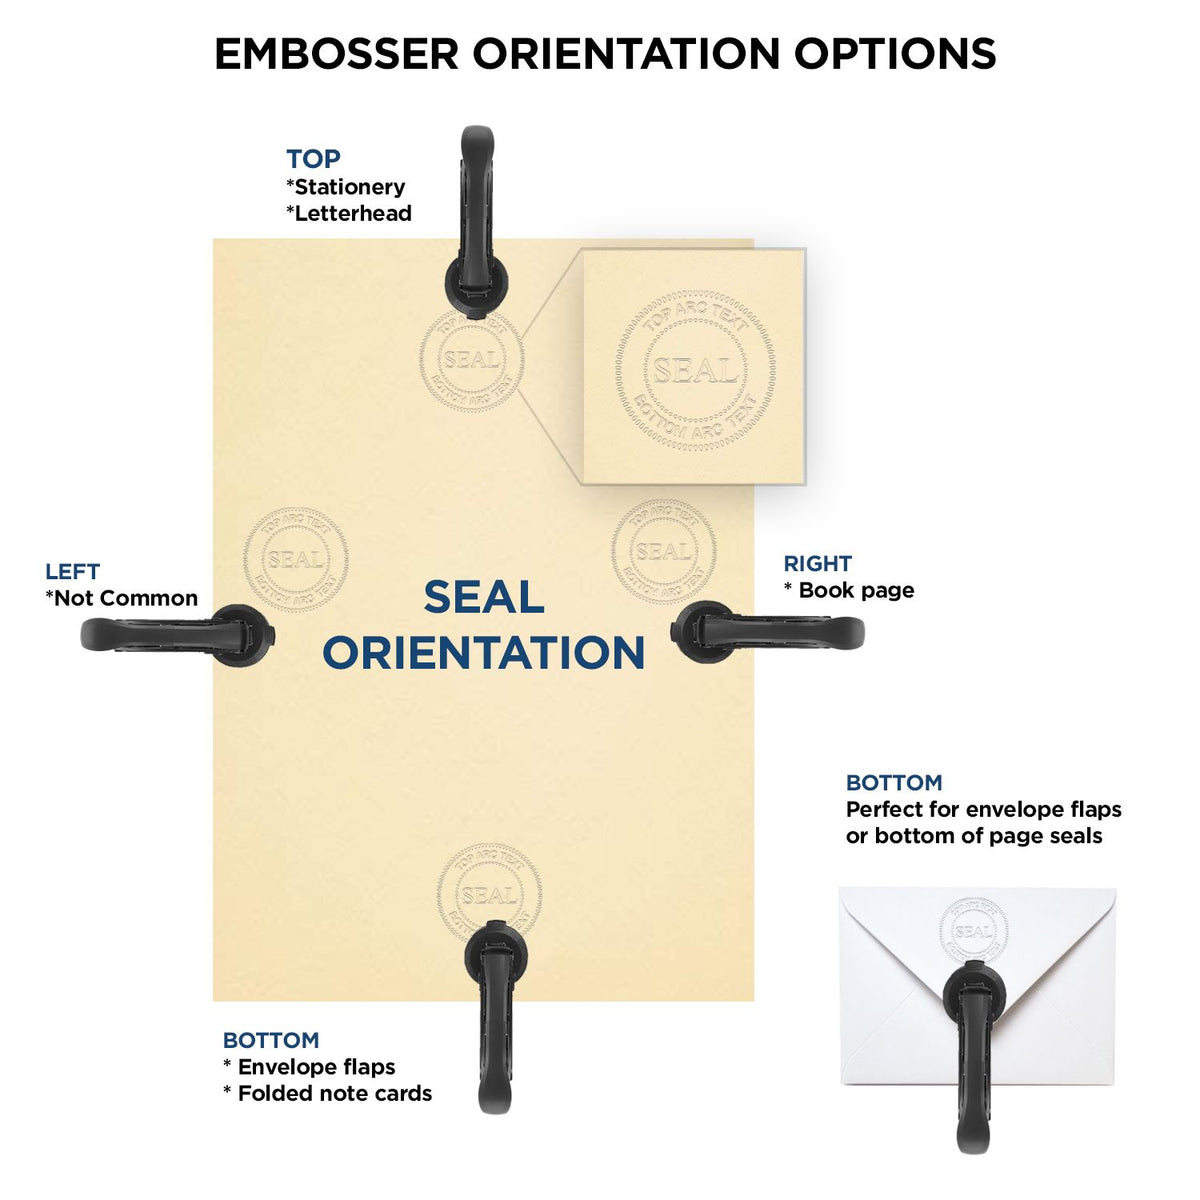 An infographic for the Handheld Virginia Architect Seal Embosser showing embosser orientation, this is showing examples of a top, bottom, right and left insert.